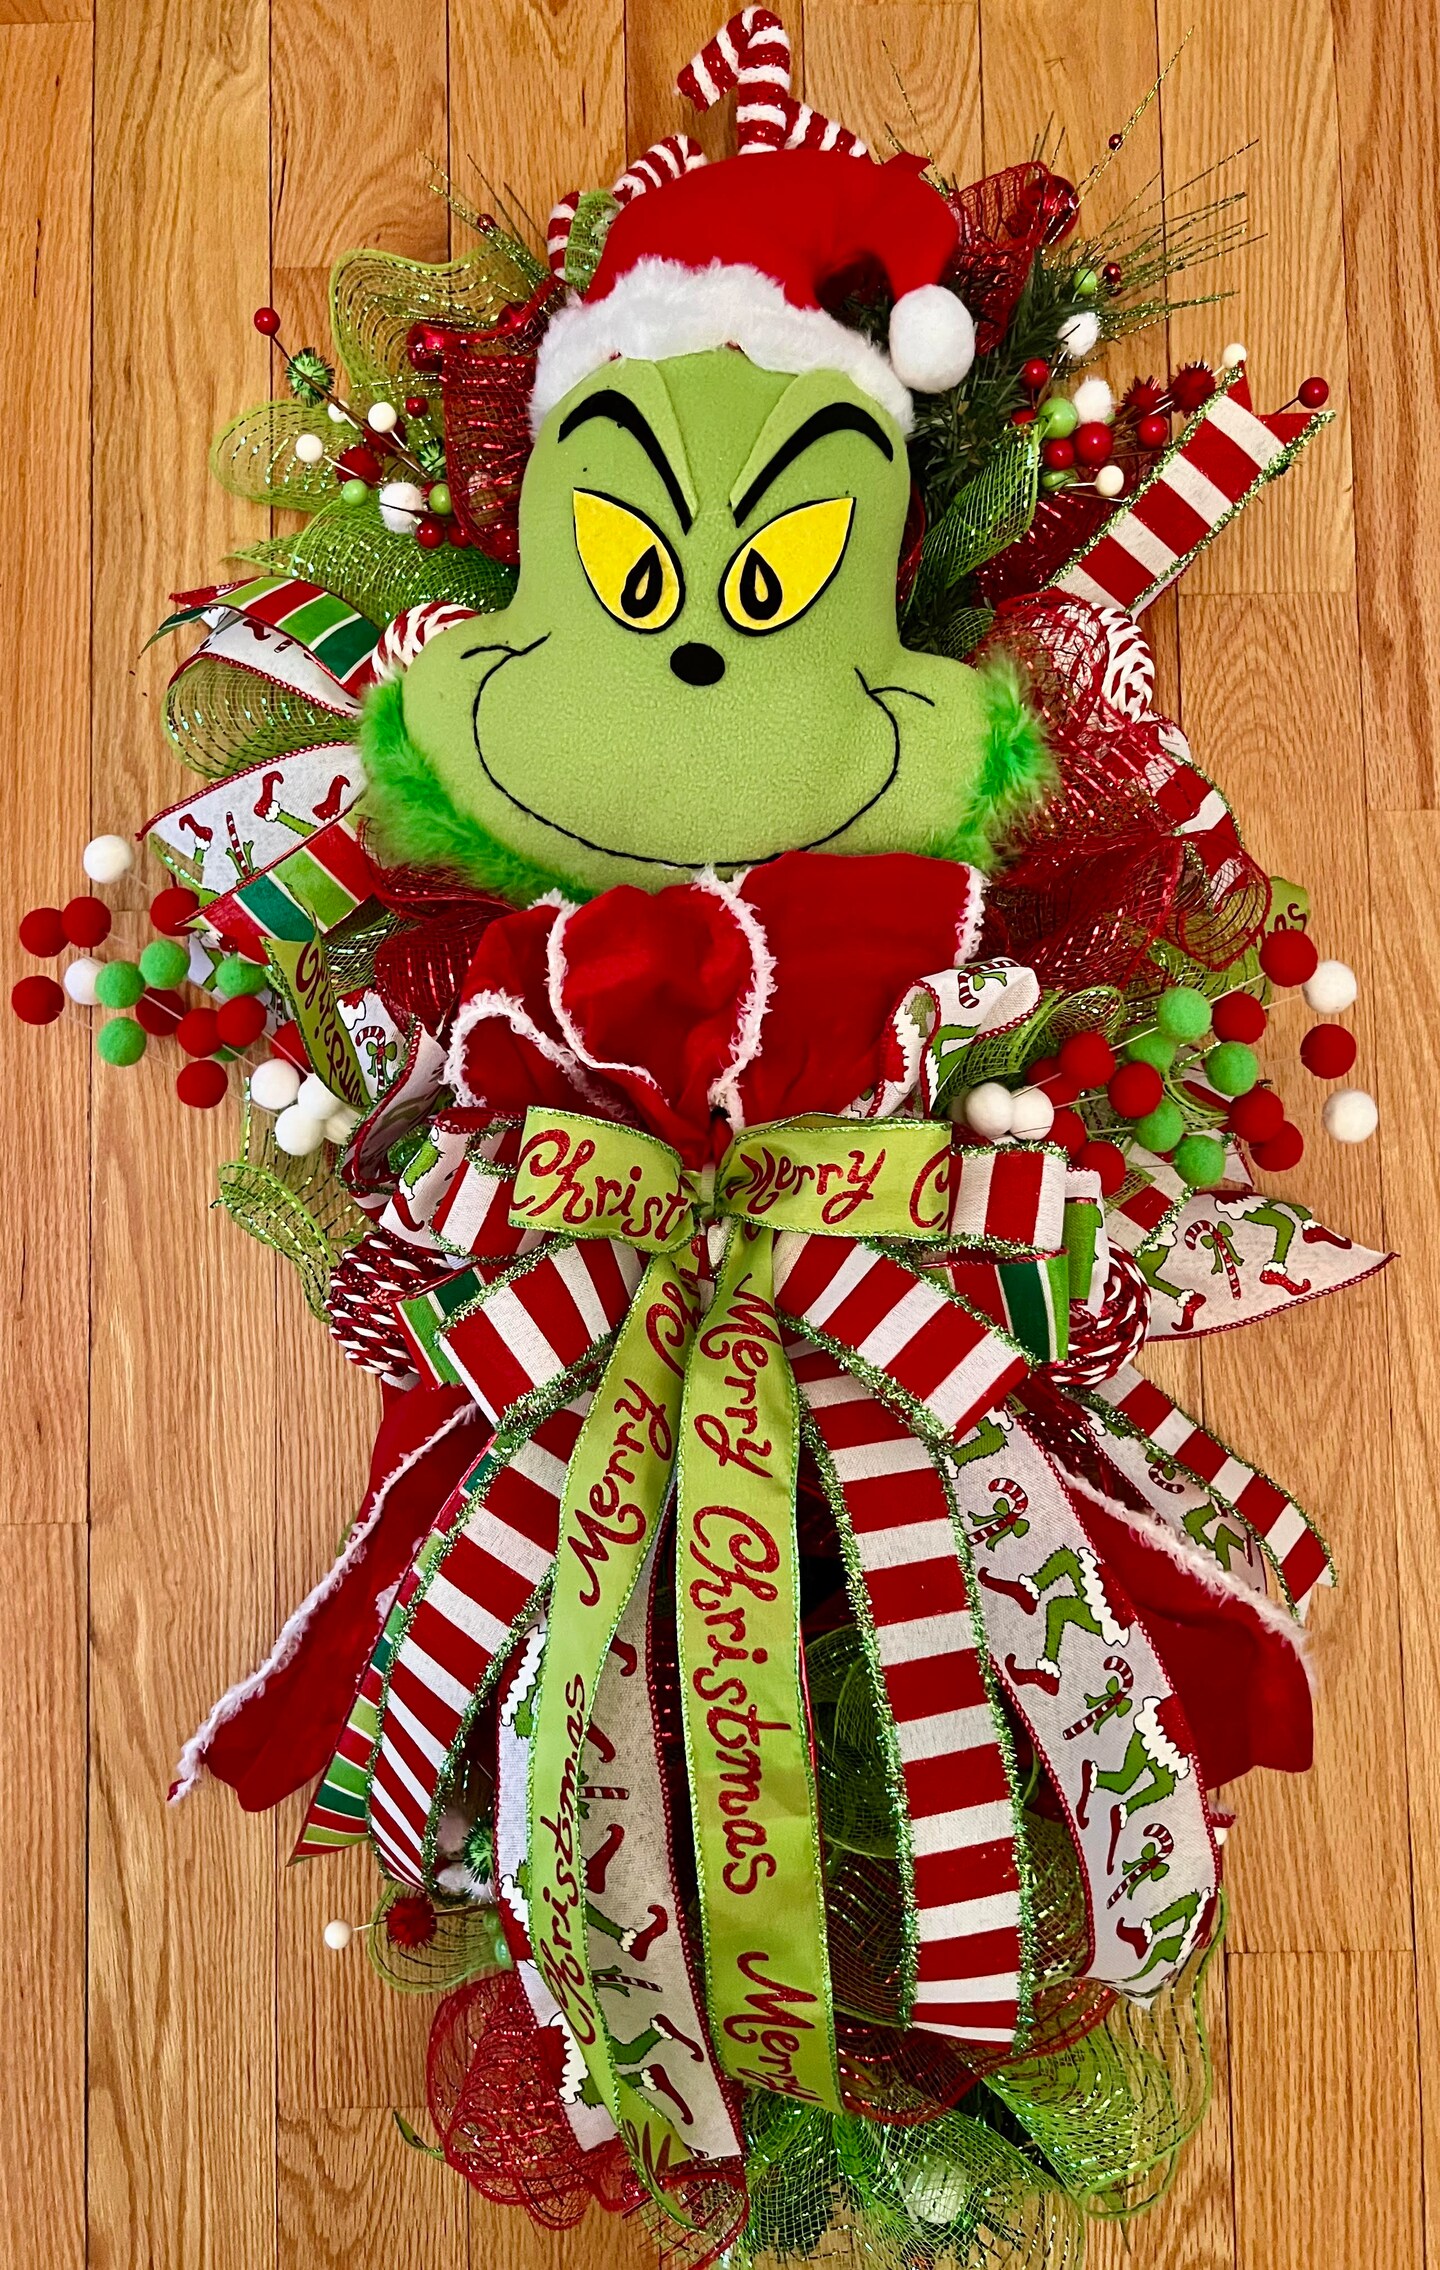 Grinch Themed Swags, Grinch Themed Wreaths, Grinch Decor, Christmas Swags,  Christmas Wreaths, Green Monster Swags, Door Decor, Door Swags 